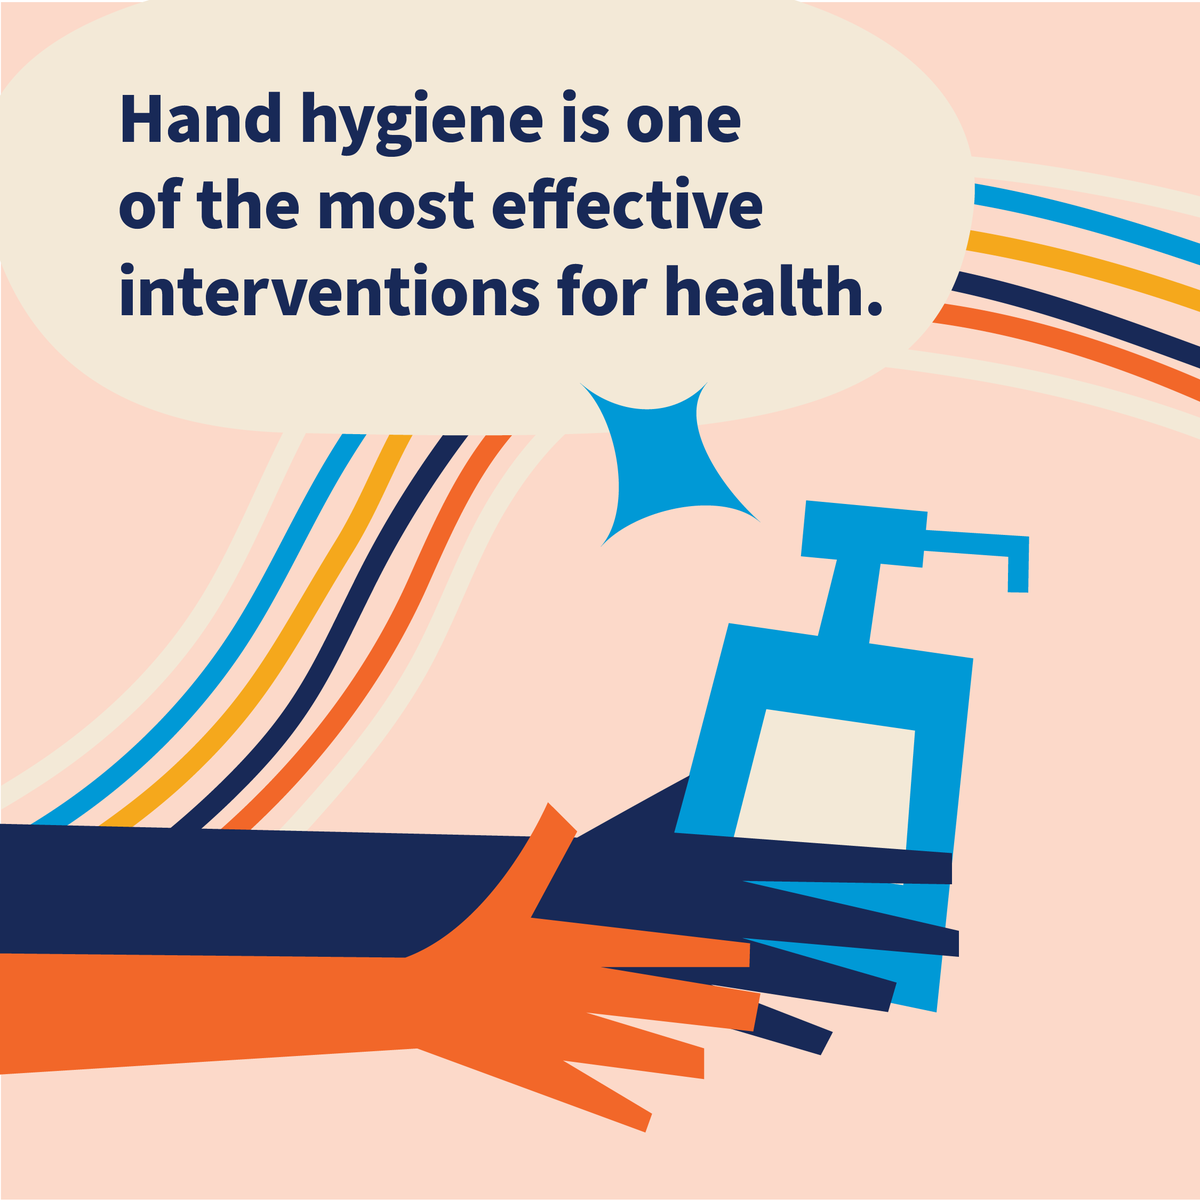 World Hand Hygiene Day takes place on 5 May and the World Health Organisation is hosting a global webinar on the importance of Infection Prevention and Control. Find out more at: World Hand Hygiene Day 2024 (who.int) #WHHD2024 #CleanYourHands #EveryActionCounts